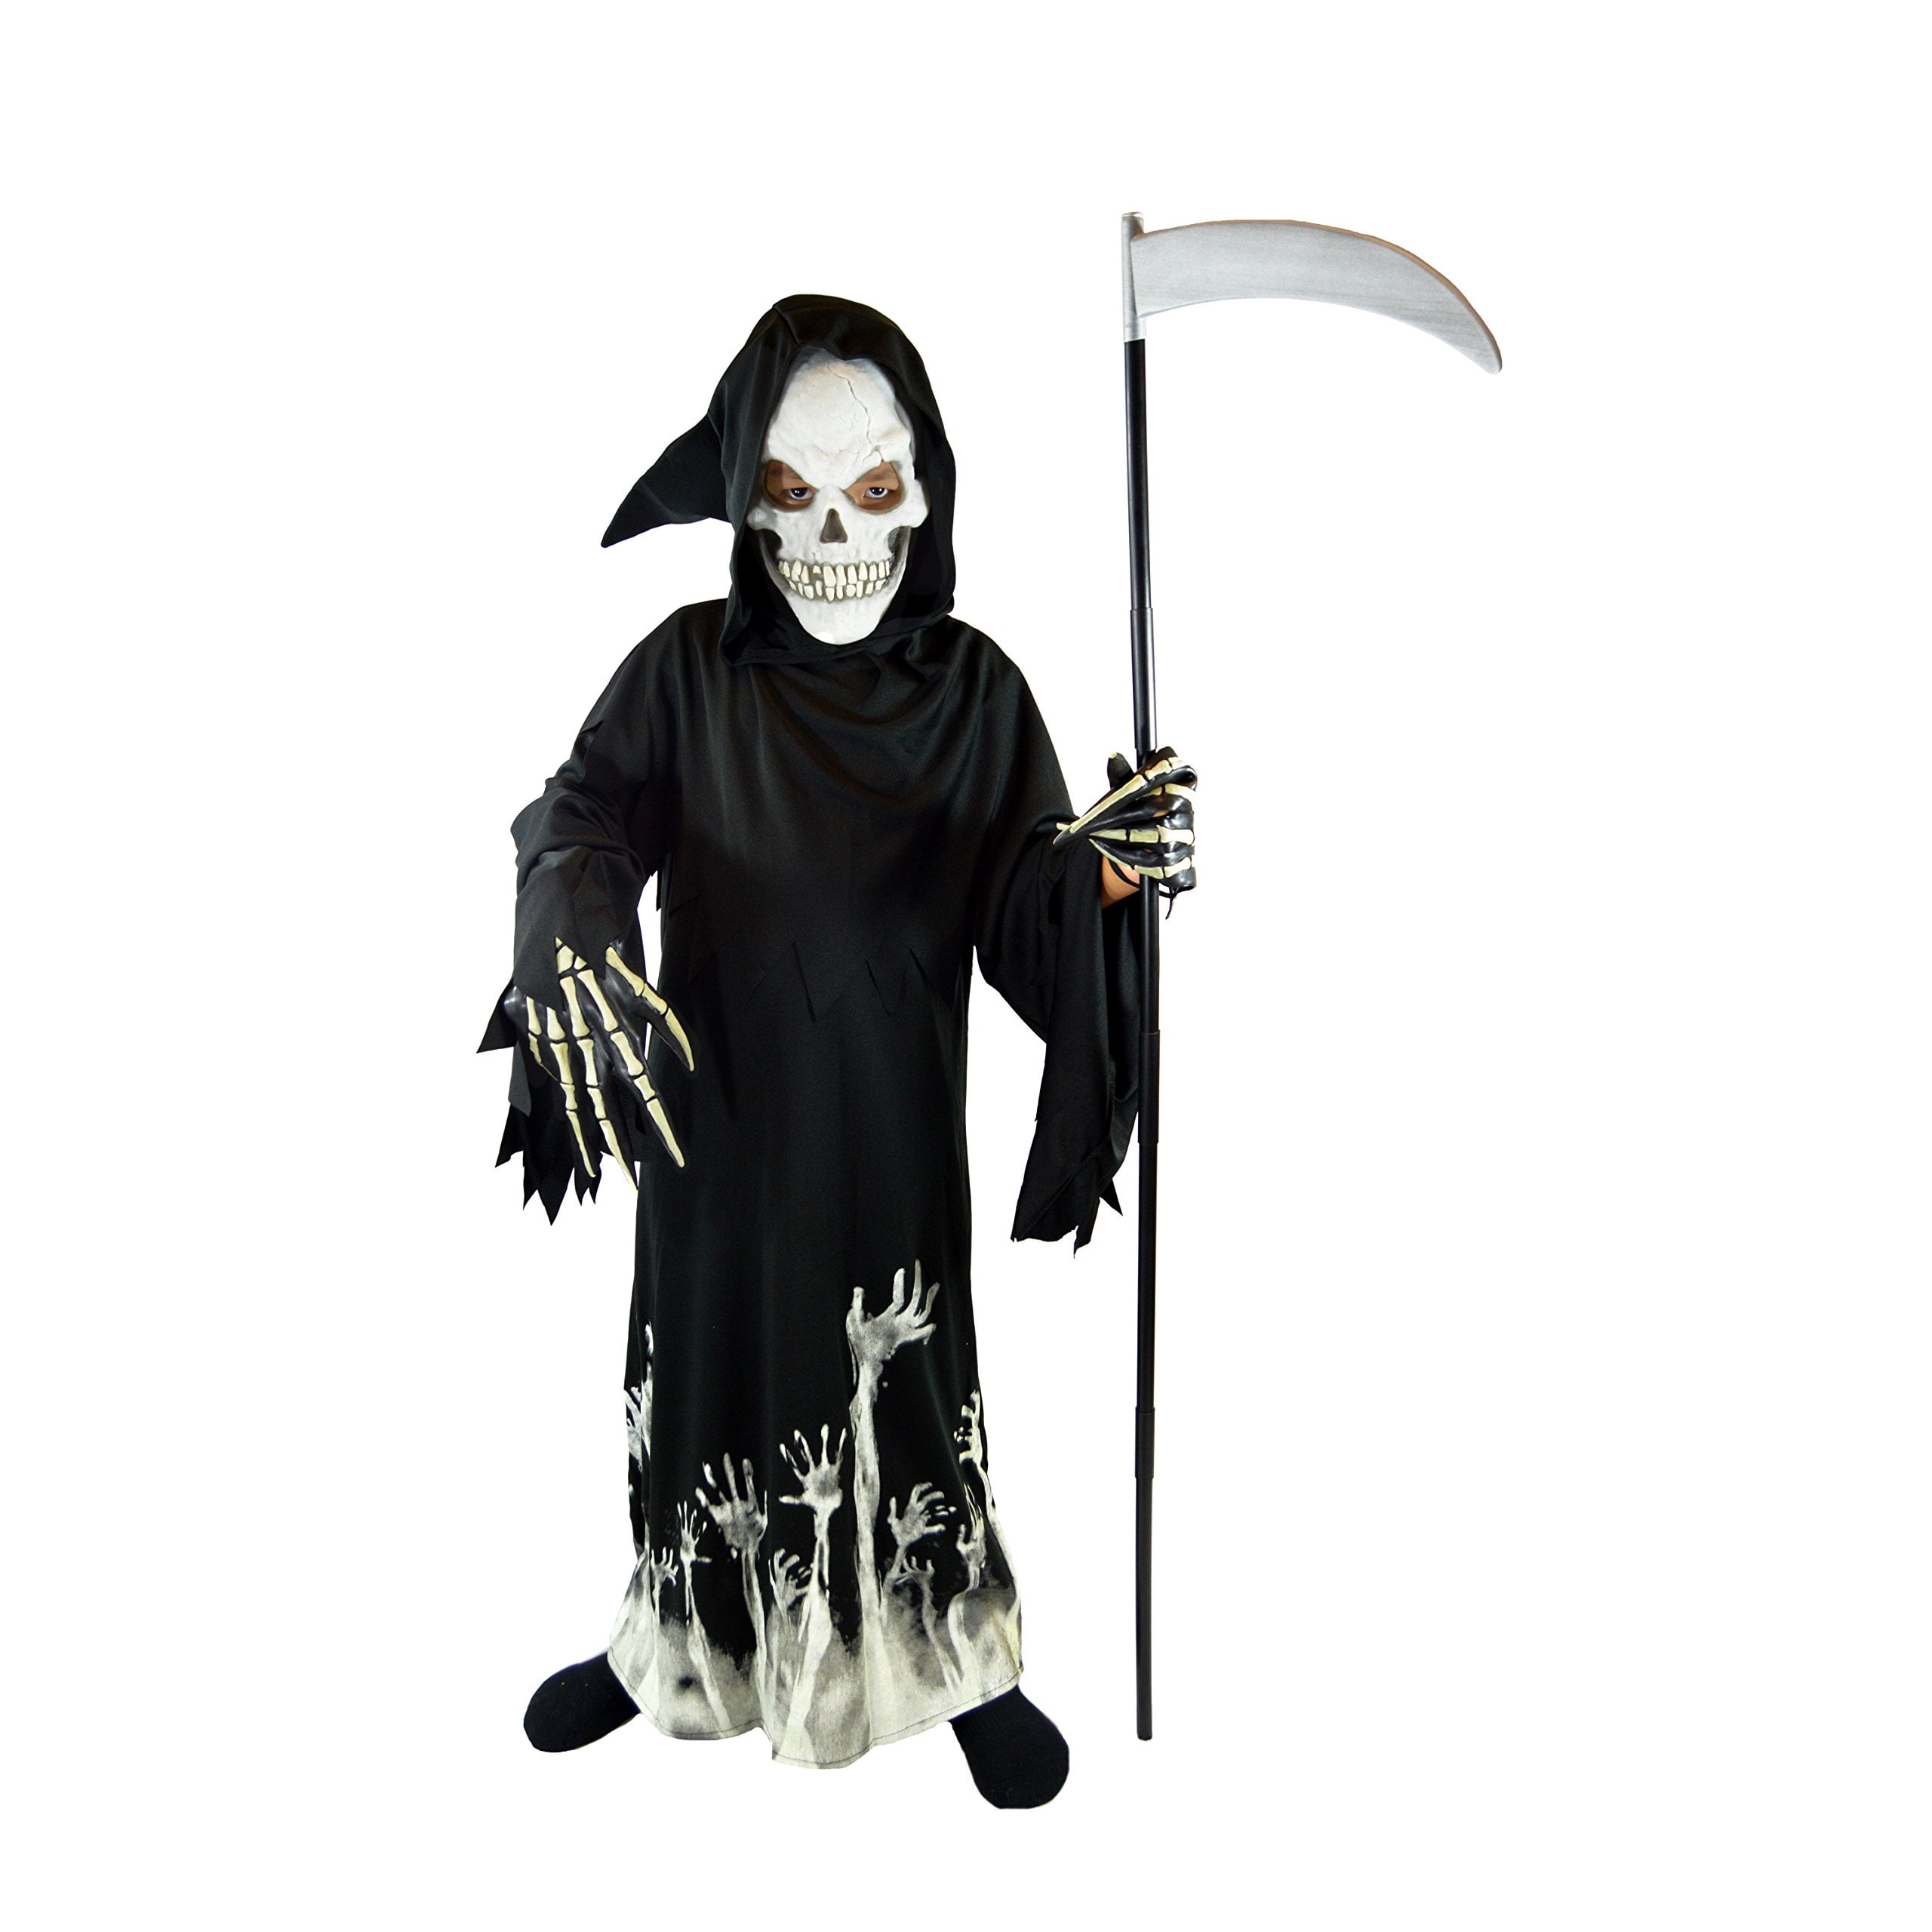 Small Spooktacular Creations Grim Reaper Girl Costume Glow in The Dark for Halloween 5 – 7 yrs 